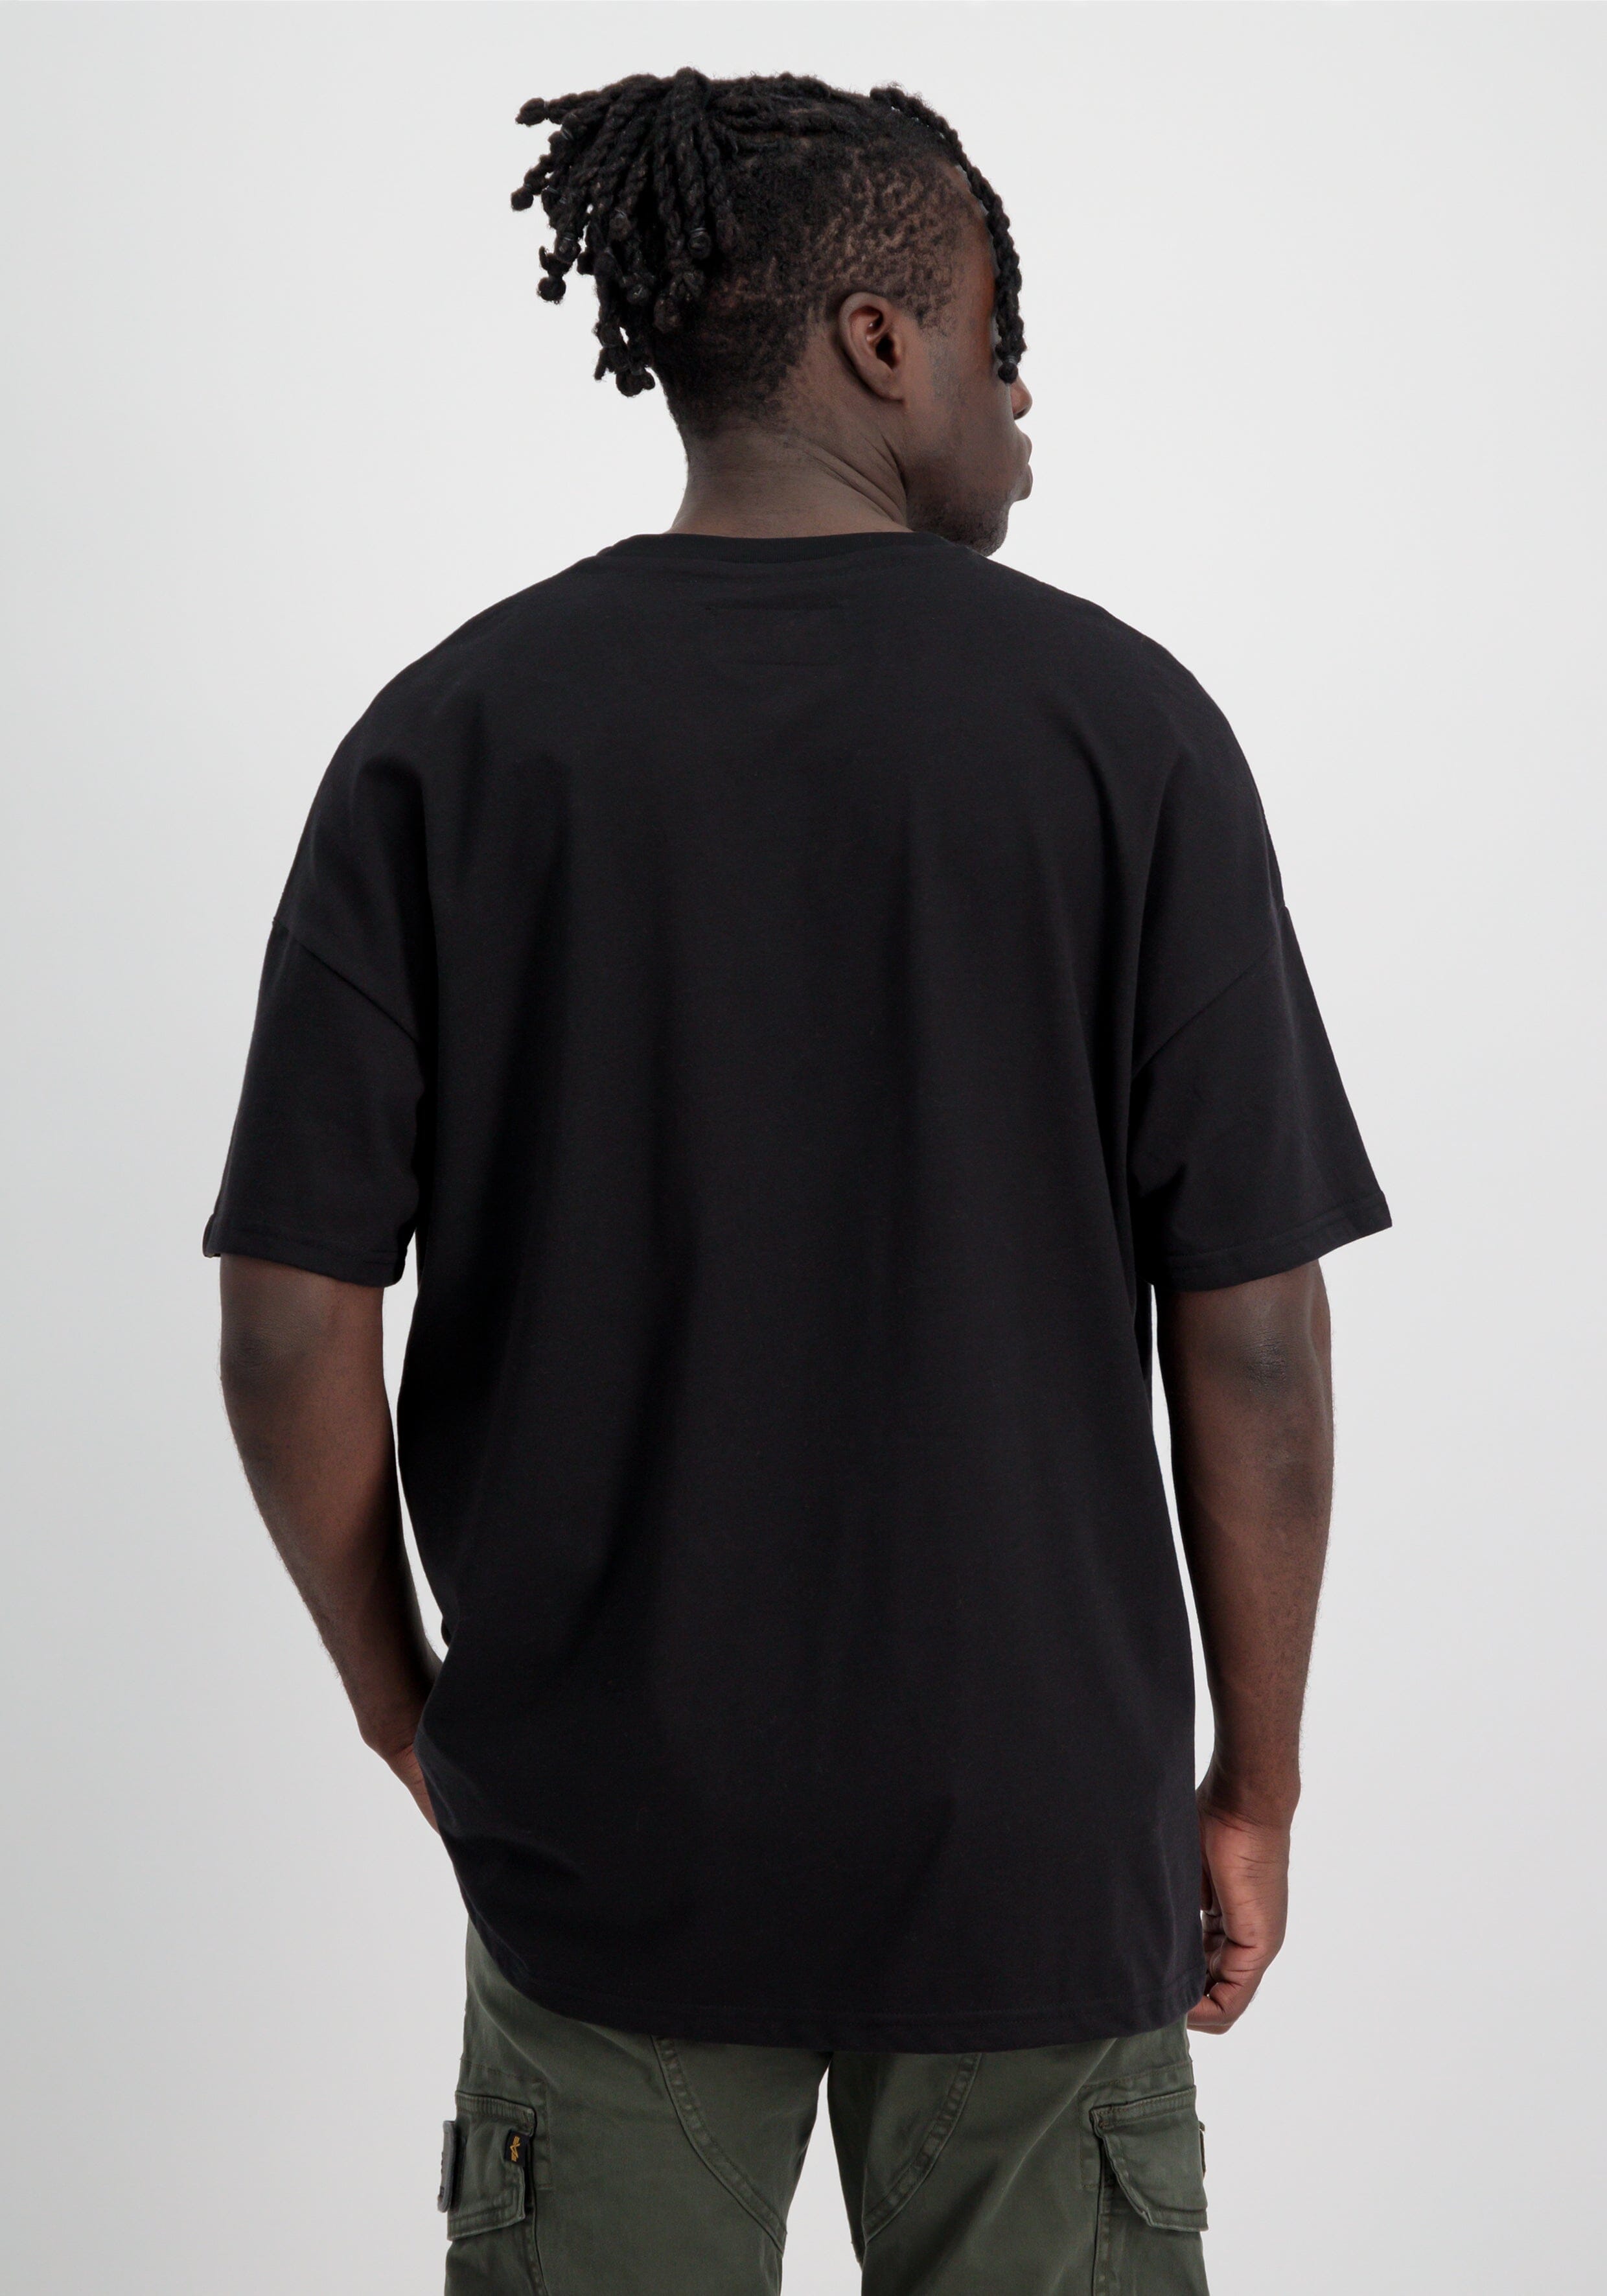 RECYCLED LABEL TEE TOP Alpha Industries 